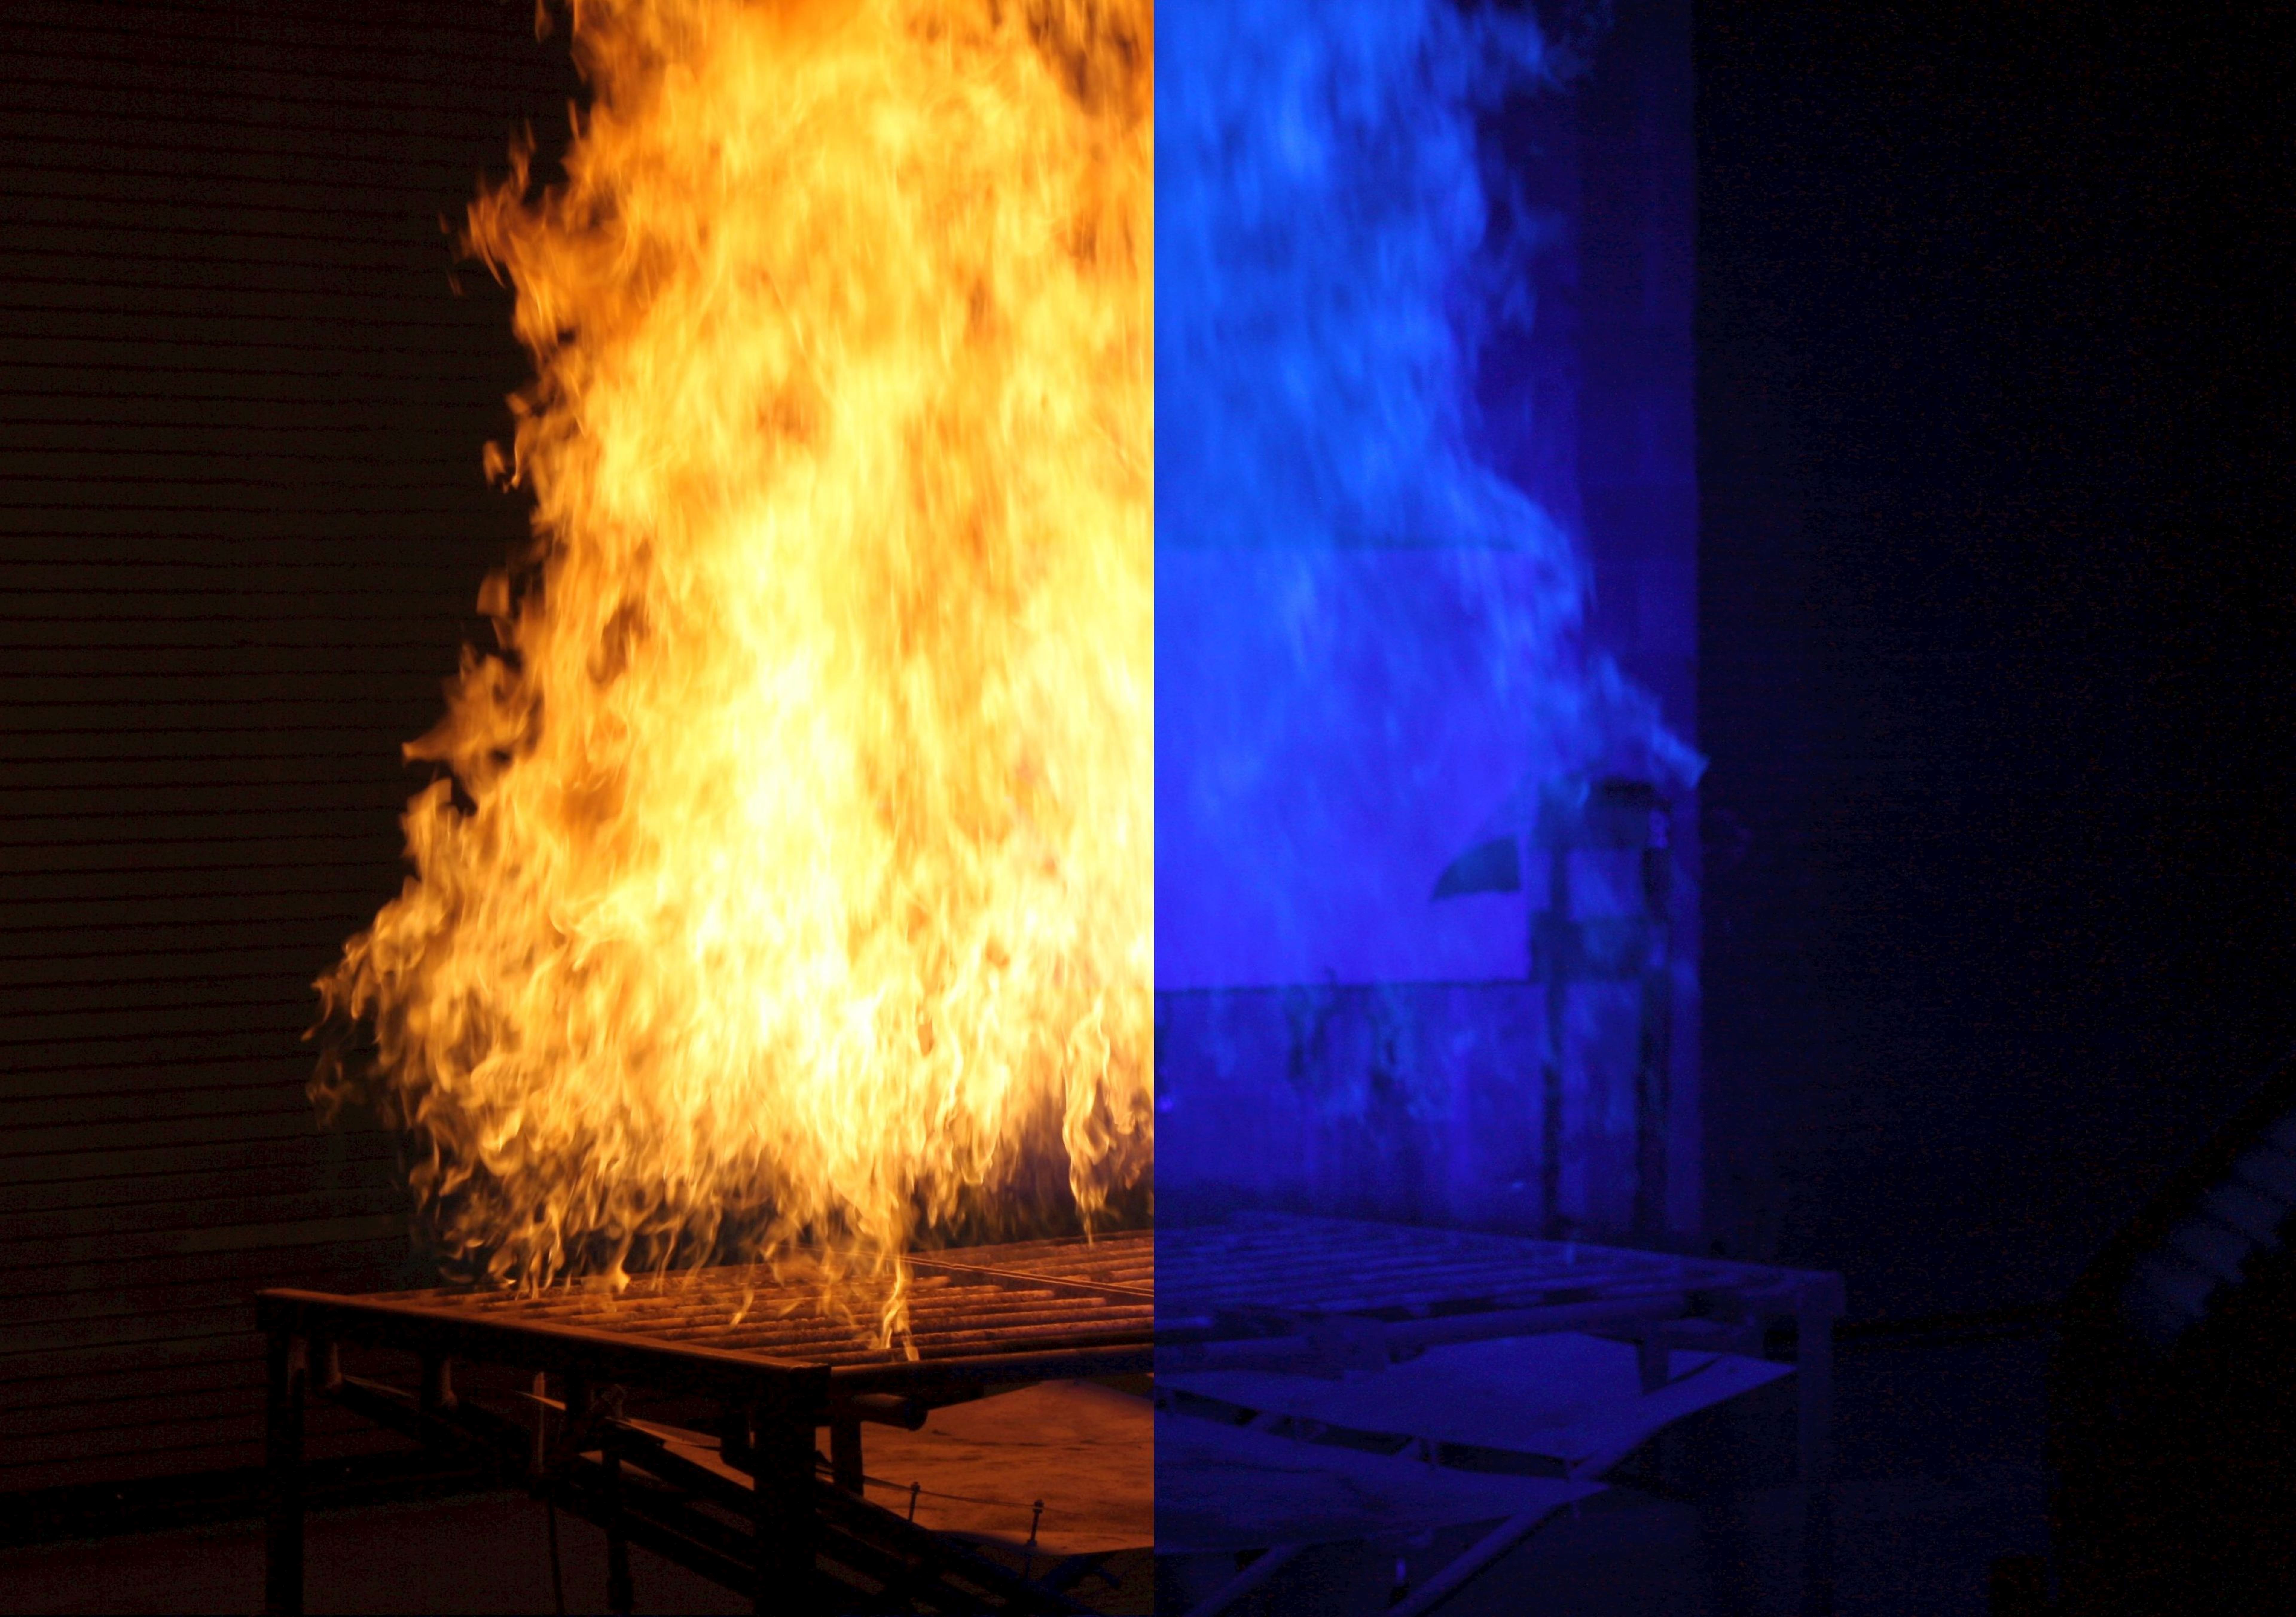 NIST Unblinded Me Science: New Application of Blue Light Sees Through Fire |